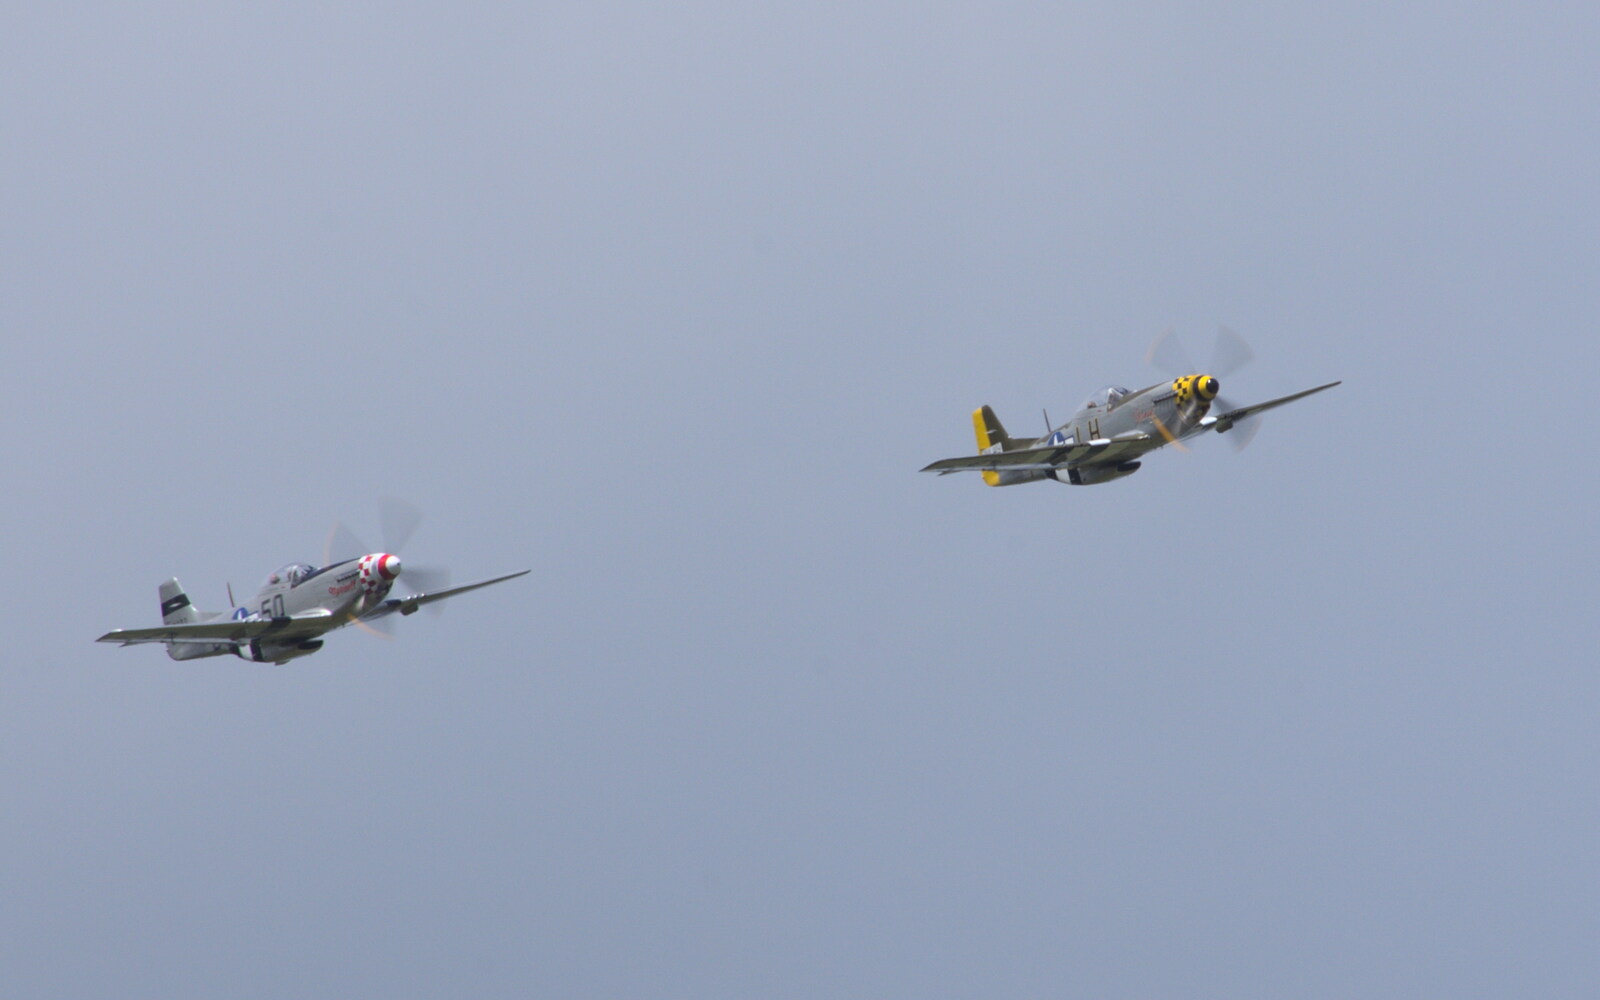 The P51-D Mustangs roar around from A Vintage Tractorey Sort of Day, Palgrave, Suffolk - 21st June 2015